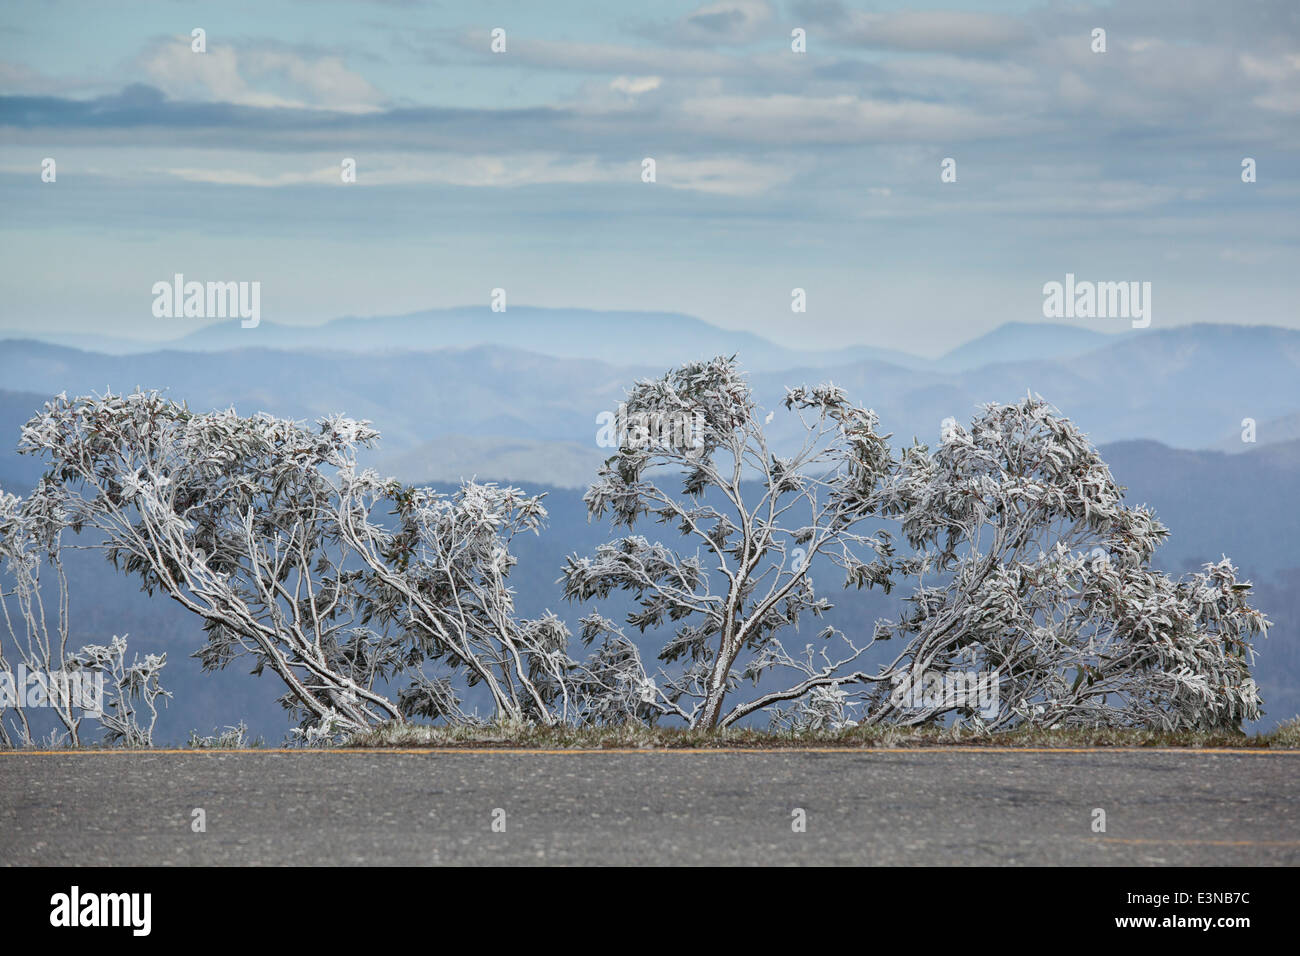 View of trees covered with snow, mountains in background, Mt Hotham, Victoria, Australia Stock Photo